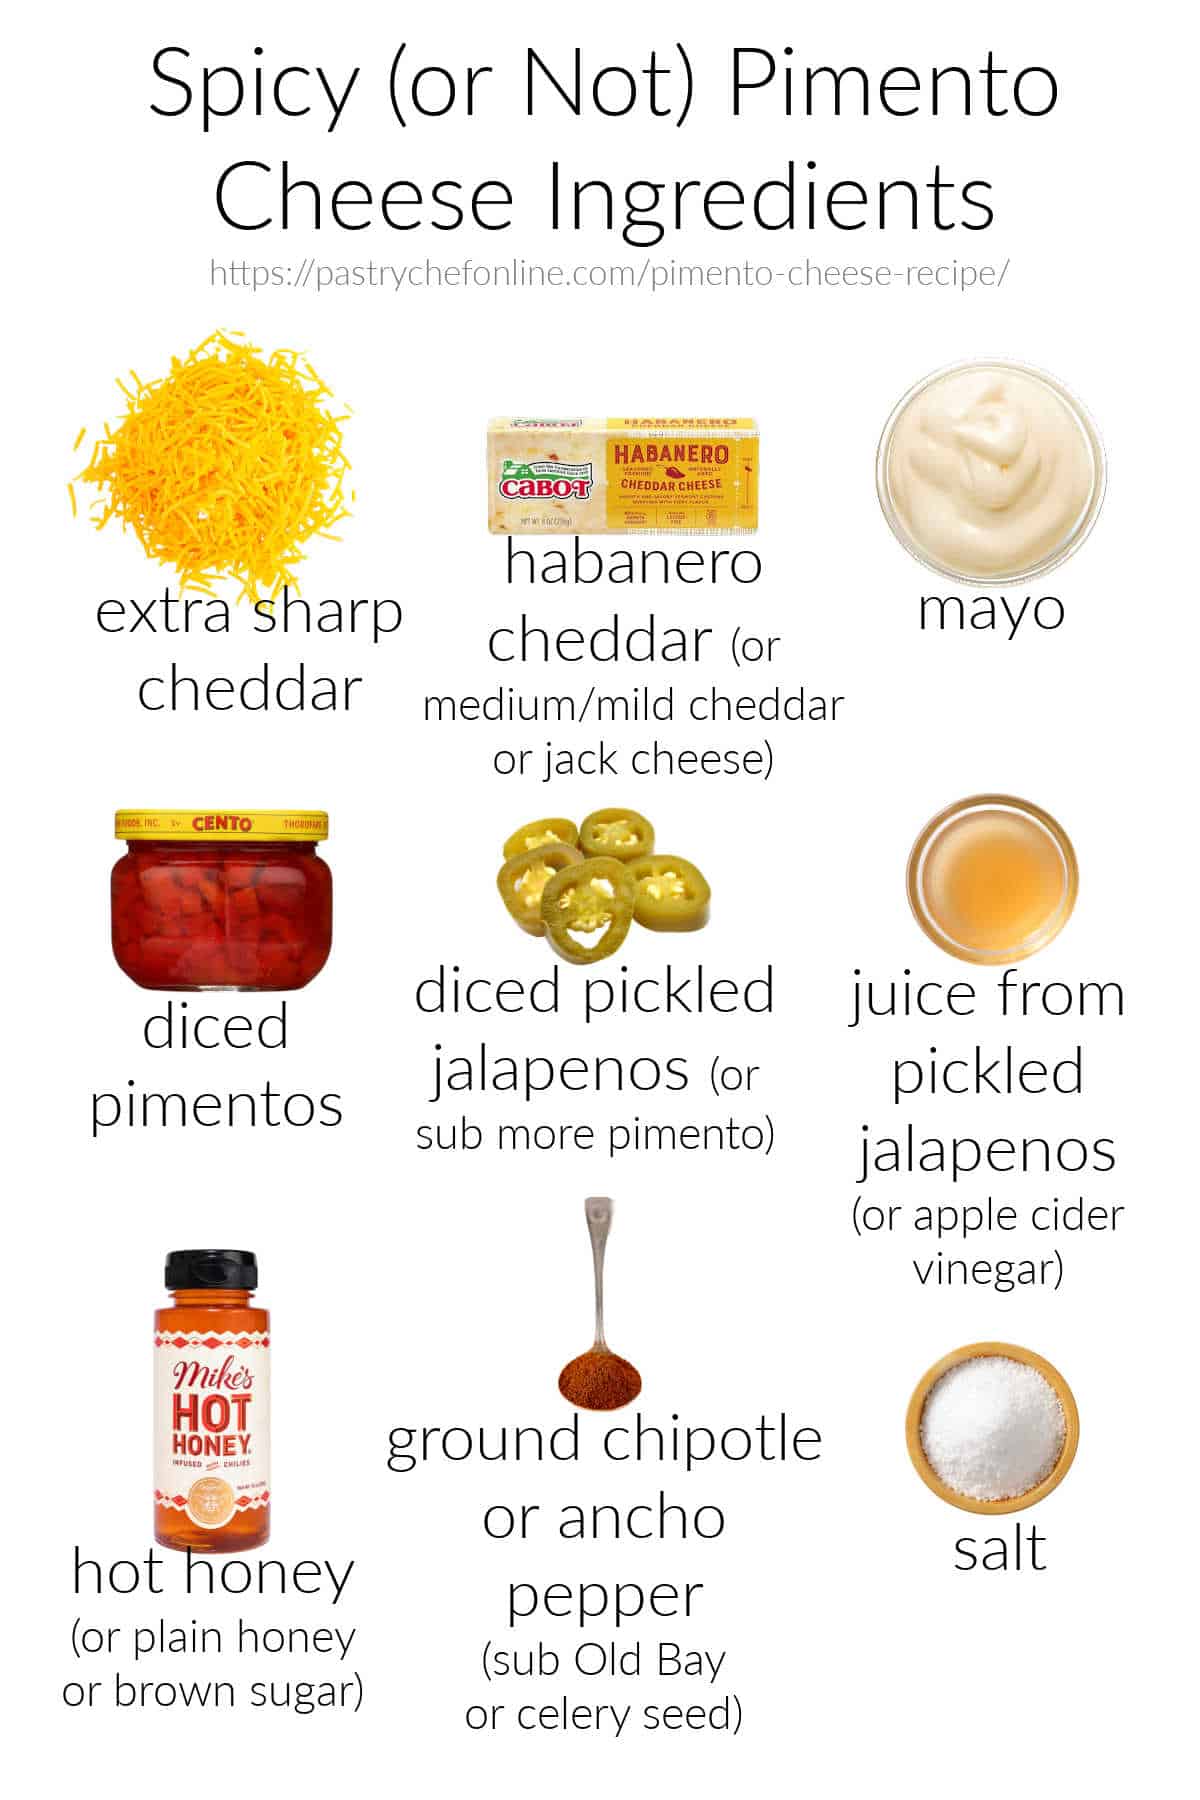 A white background with full-color images of all the ingredients needed to make pimento cheese, labeled in sans serif font. Title text reads, "Spicy (or Not) Pimento Cheese Ingredients," and the pictured ingredients and accompanying text are extra sharp cheddar, habanero cheddar (or medium/mild cheddar or jack cheese), mayo, diced pimentos, diced pickled jalapenos (or sub more pimentos), juice from pickled jalapenos (or apple cider vinegar), hot honey (or honey or brown sugar), ground chipotle or ancho chile (sub celery seed or Old Bay), and salt.